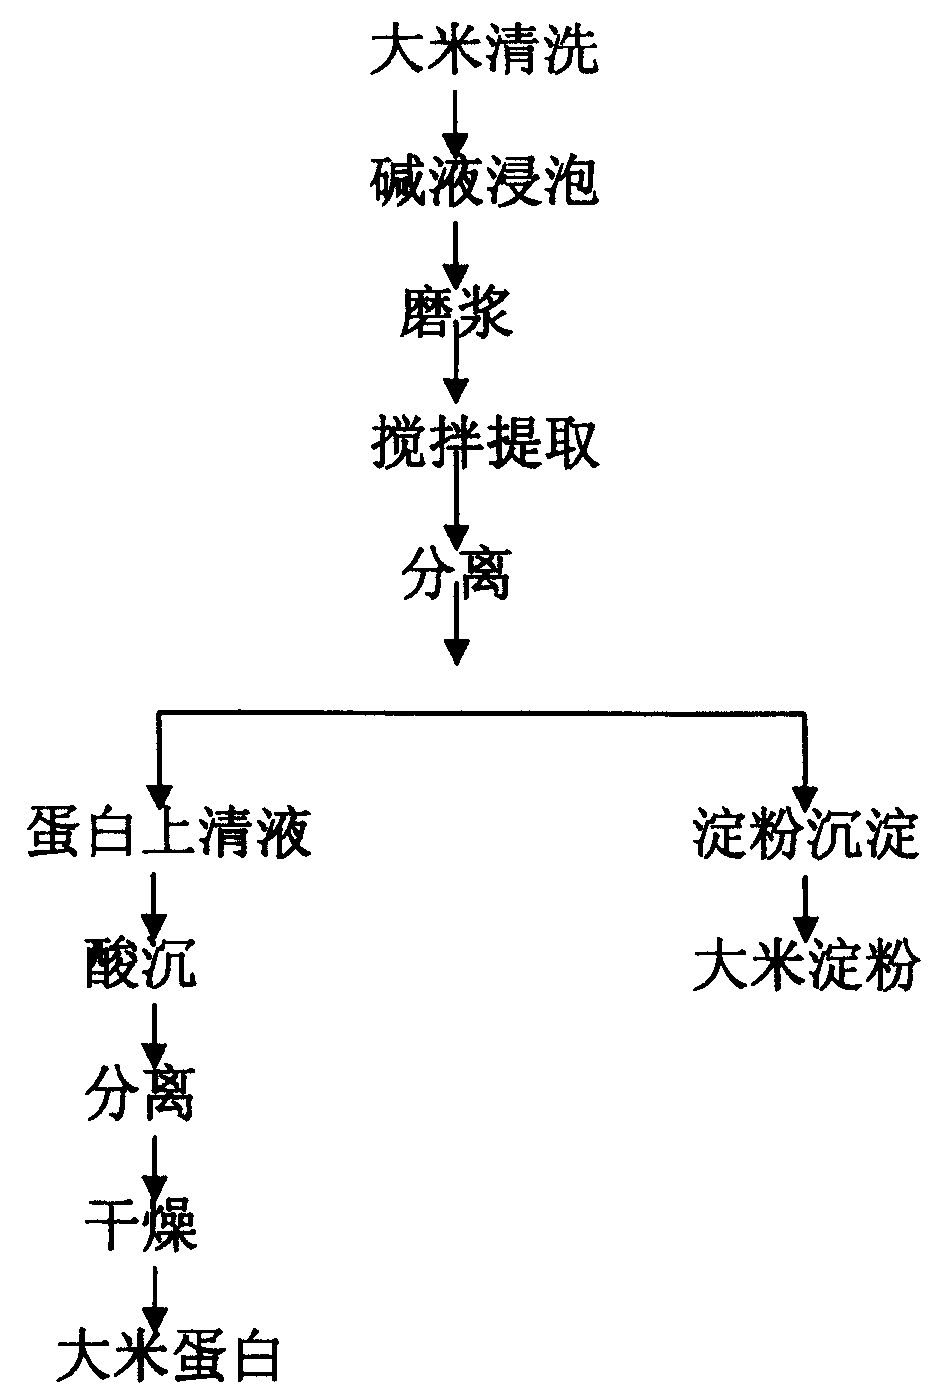 Method for extracting rice protein by alkaline process